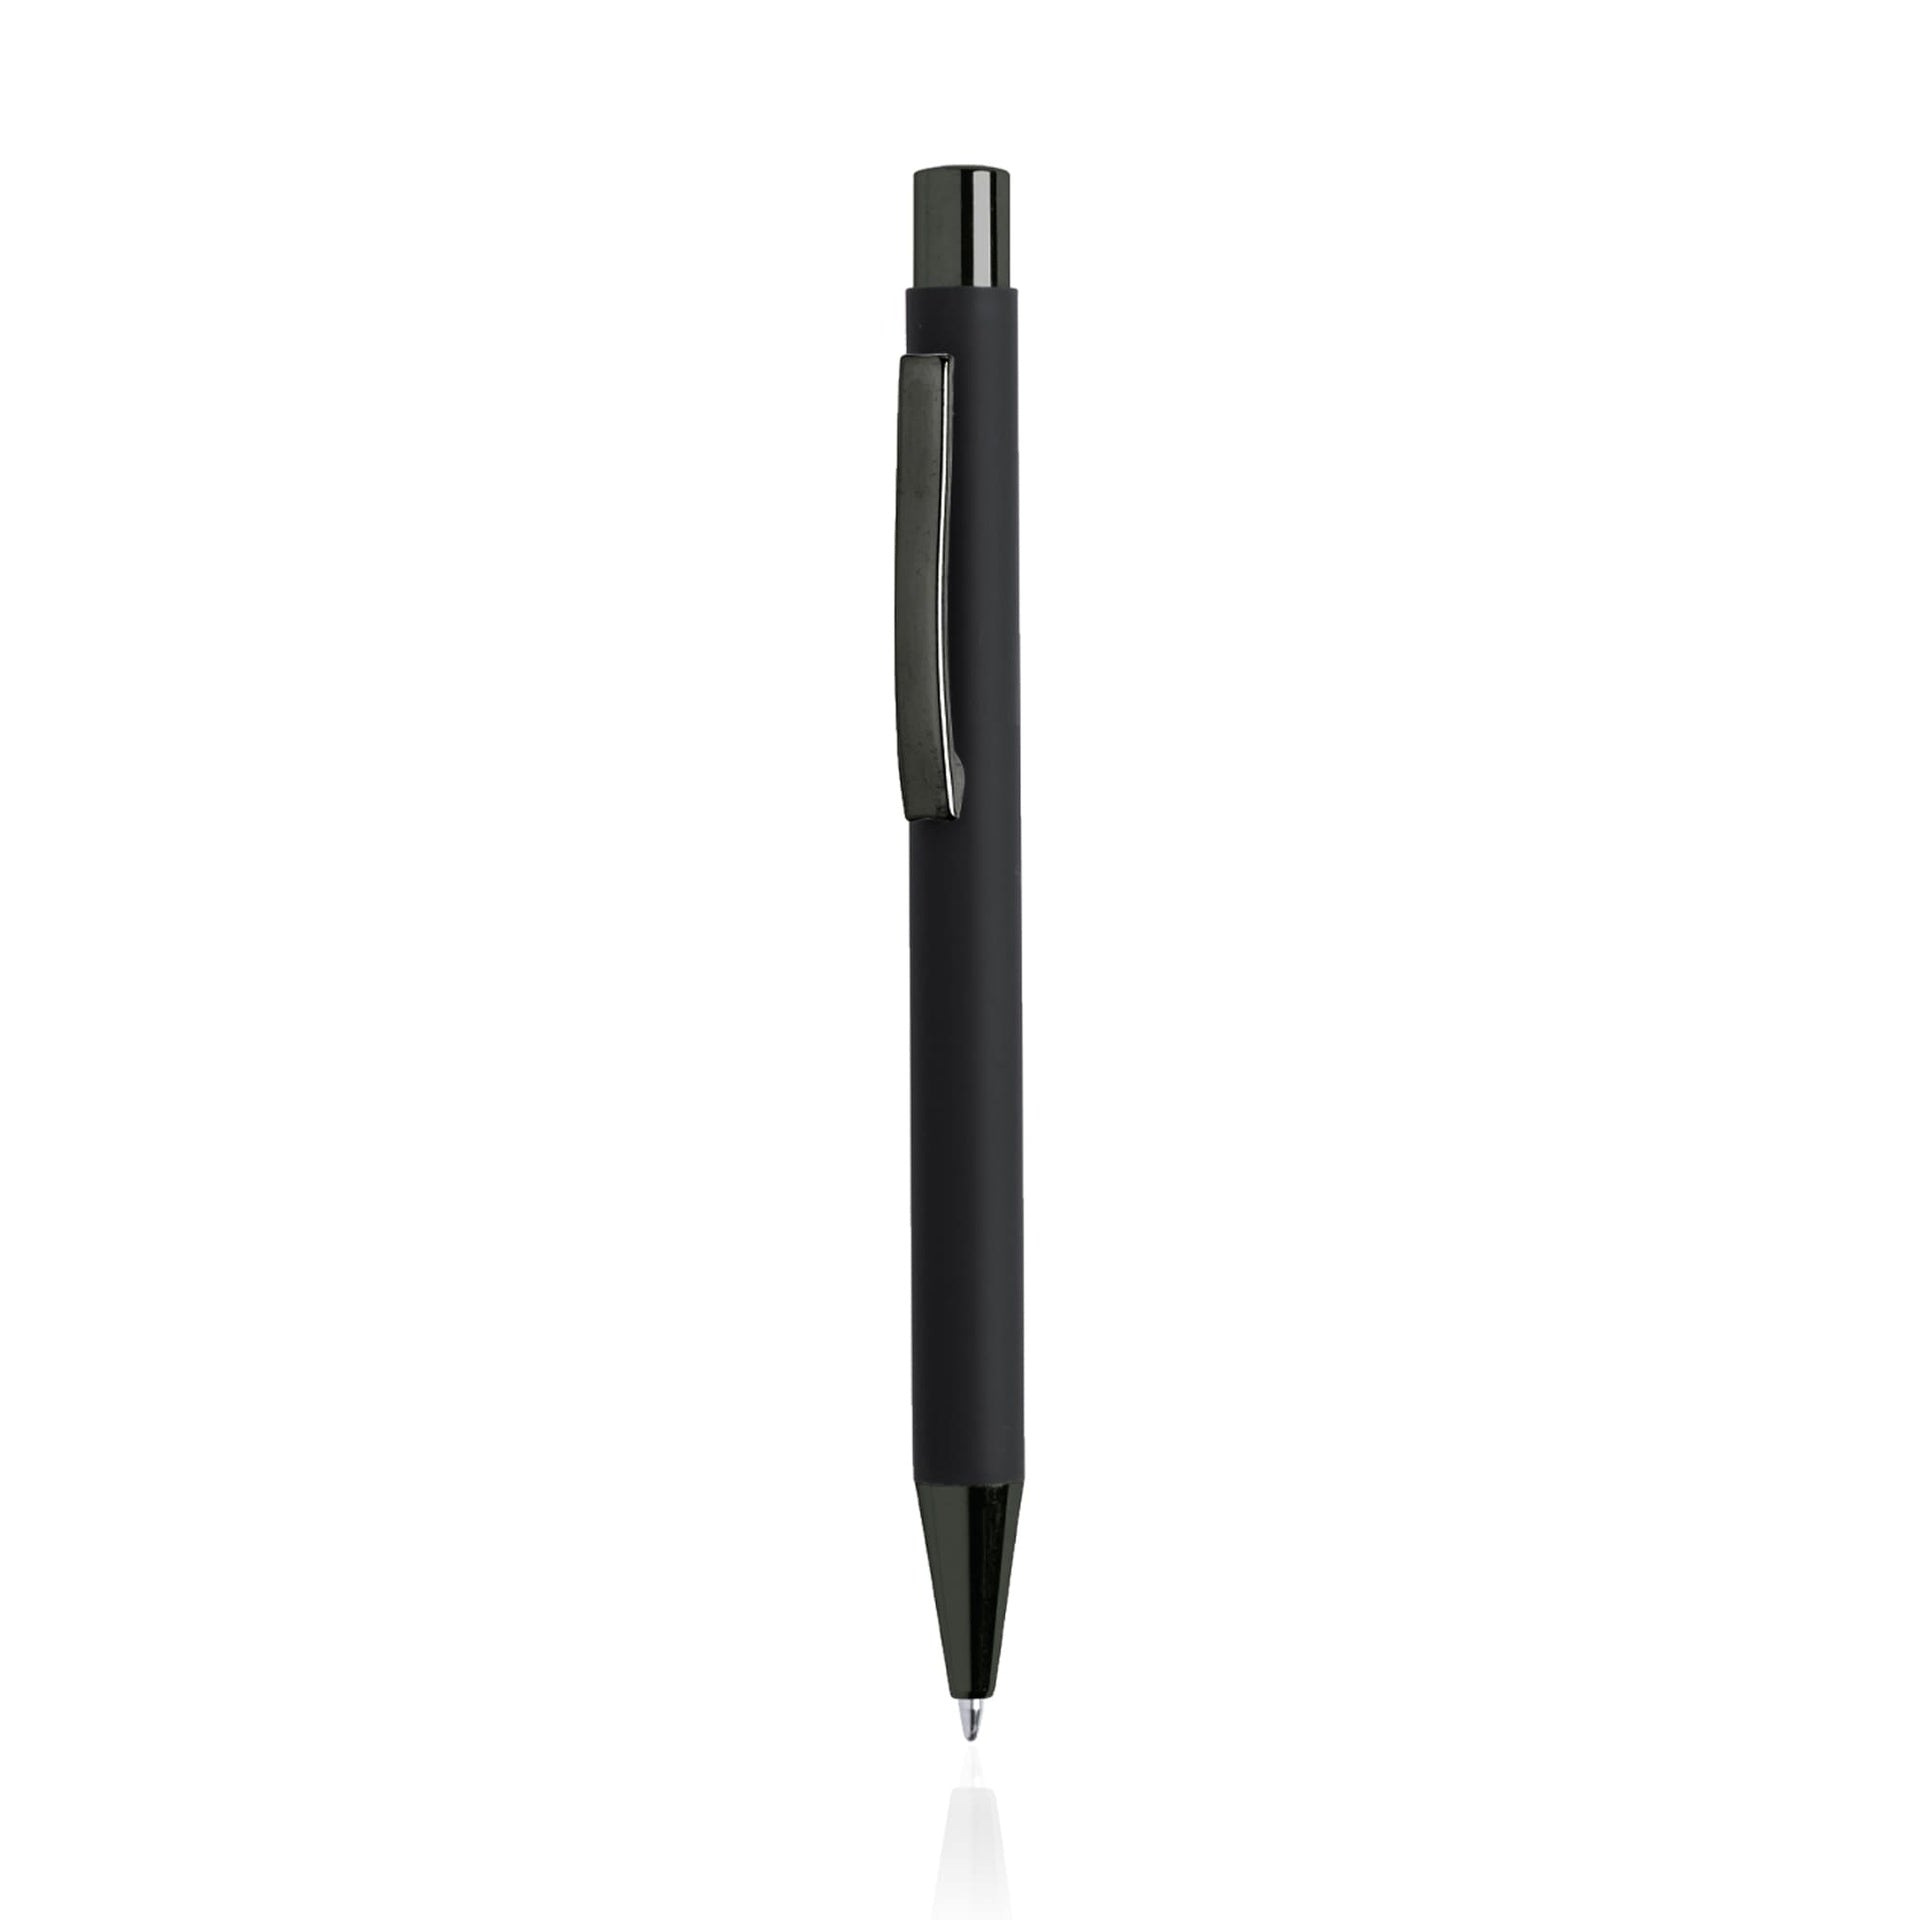 A5 Hard Cover Notebook and Pen Set - Black